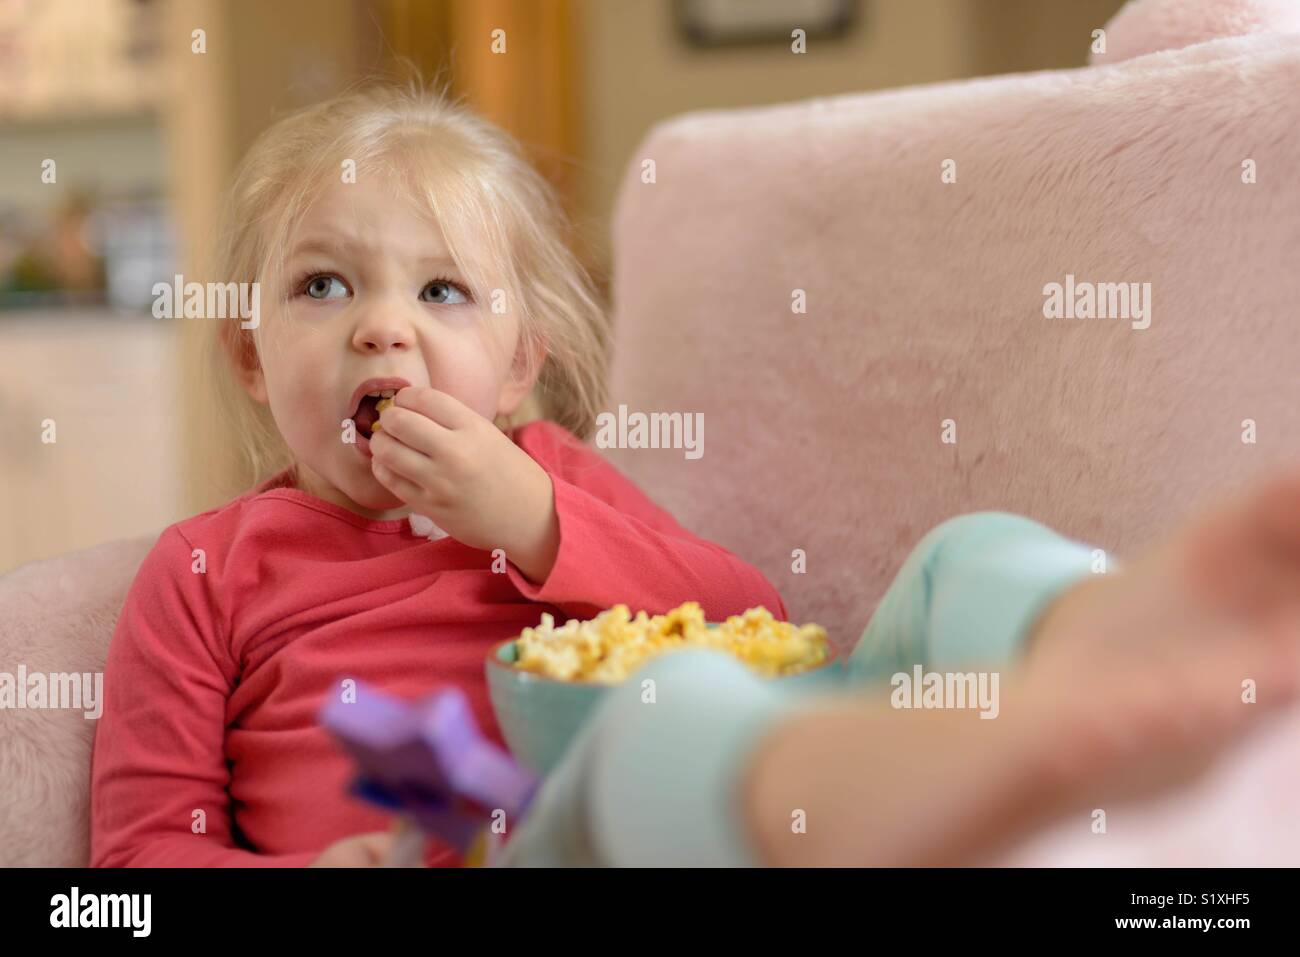 Cute girl making funny face while eating popcorn and watching TV Stock Photo